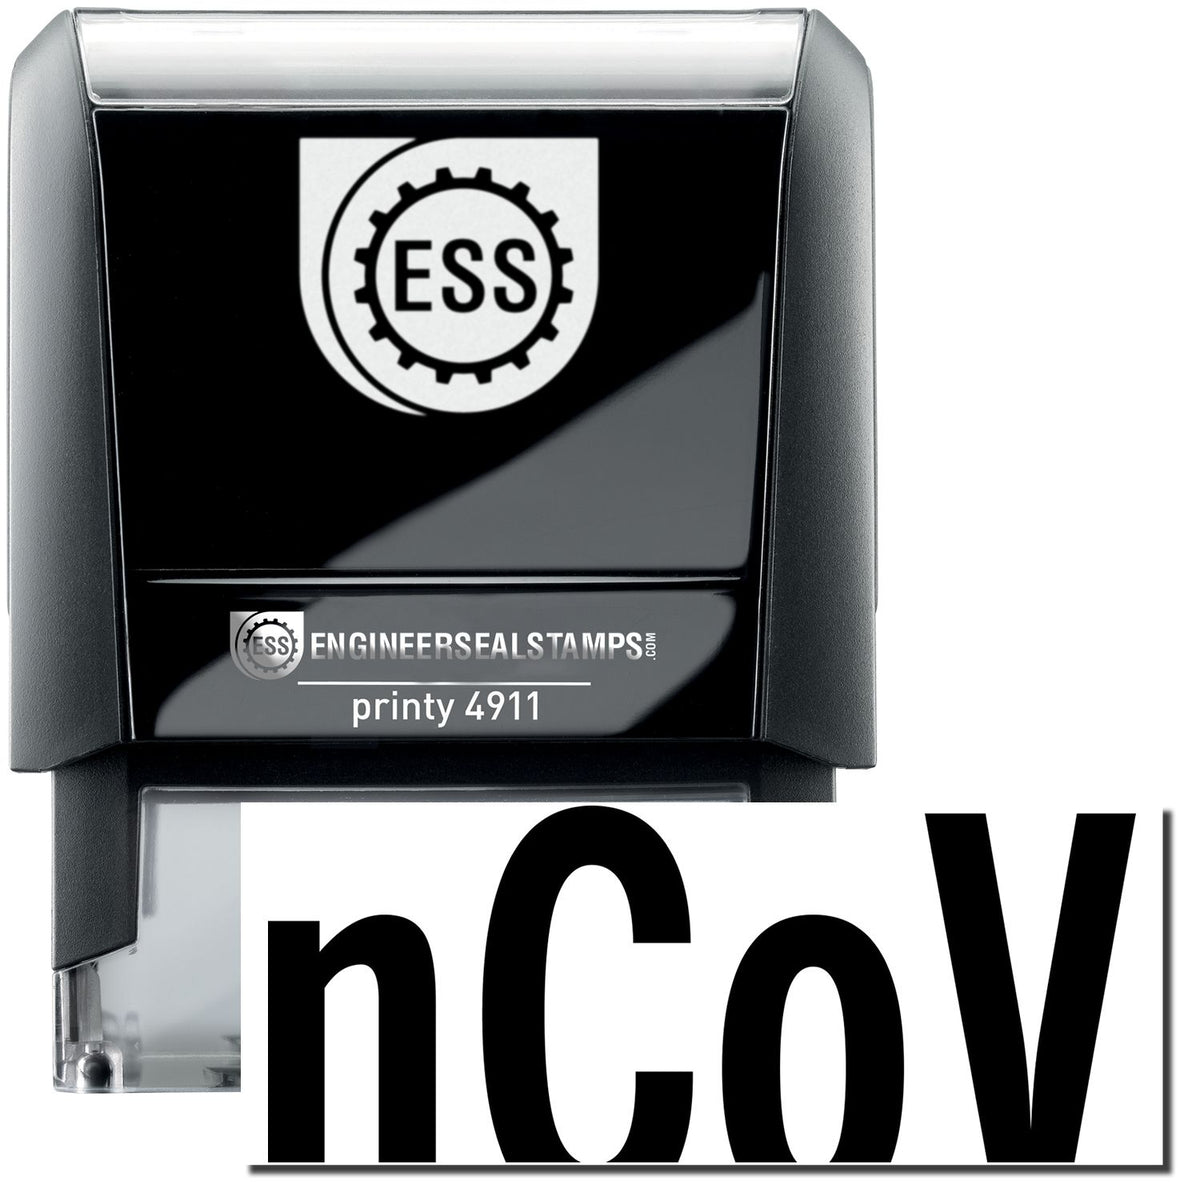 A self-inking stamp with a stamped image showing how the text &quot;nCoV&quot; is displayed after stamping.